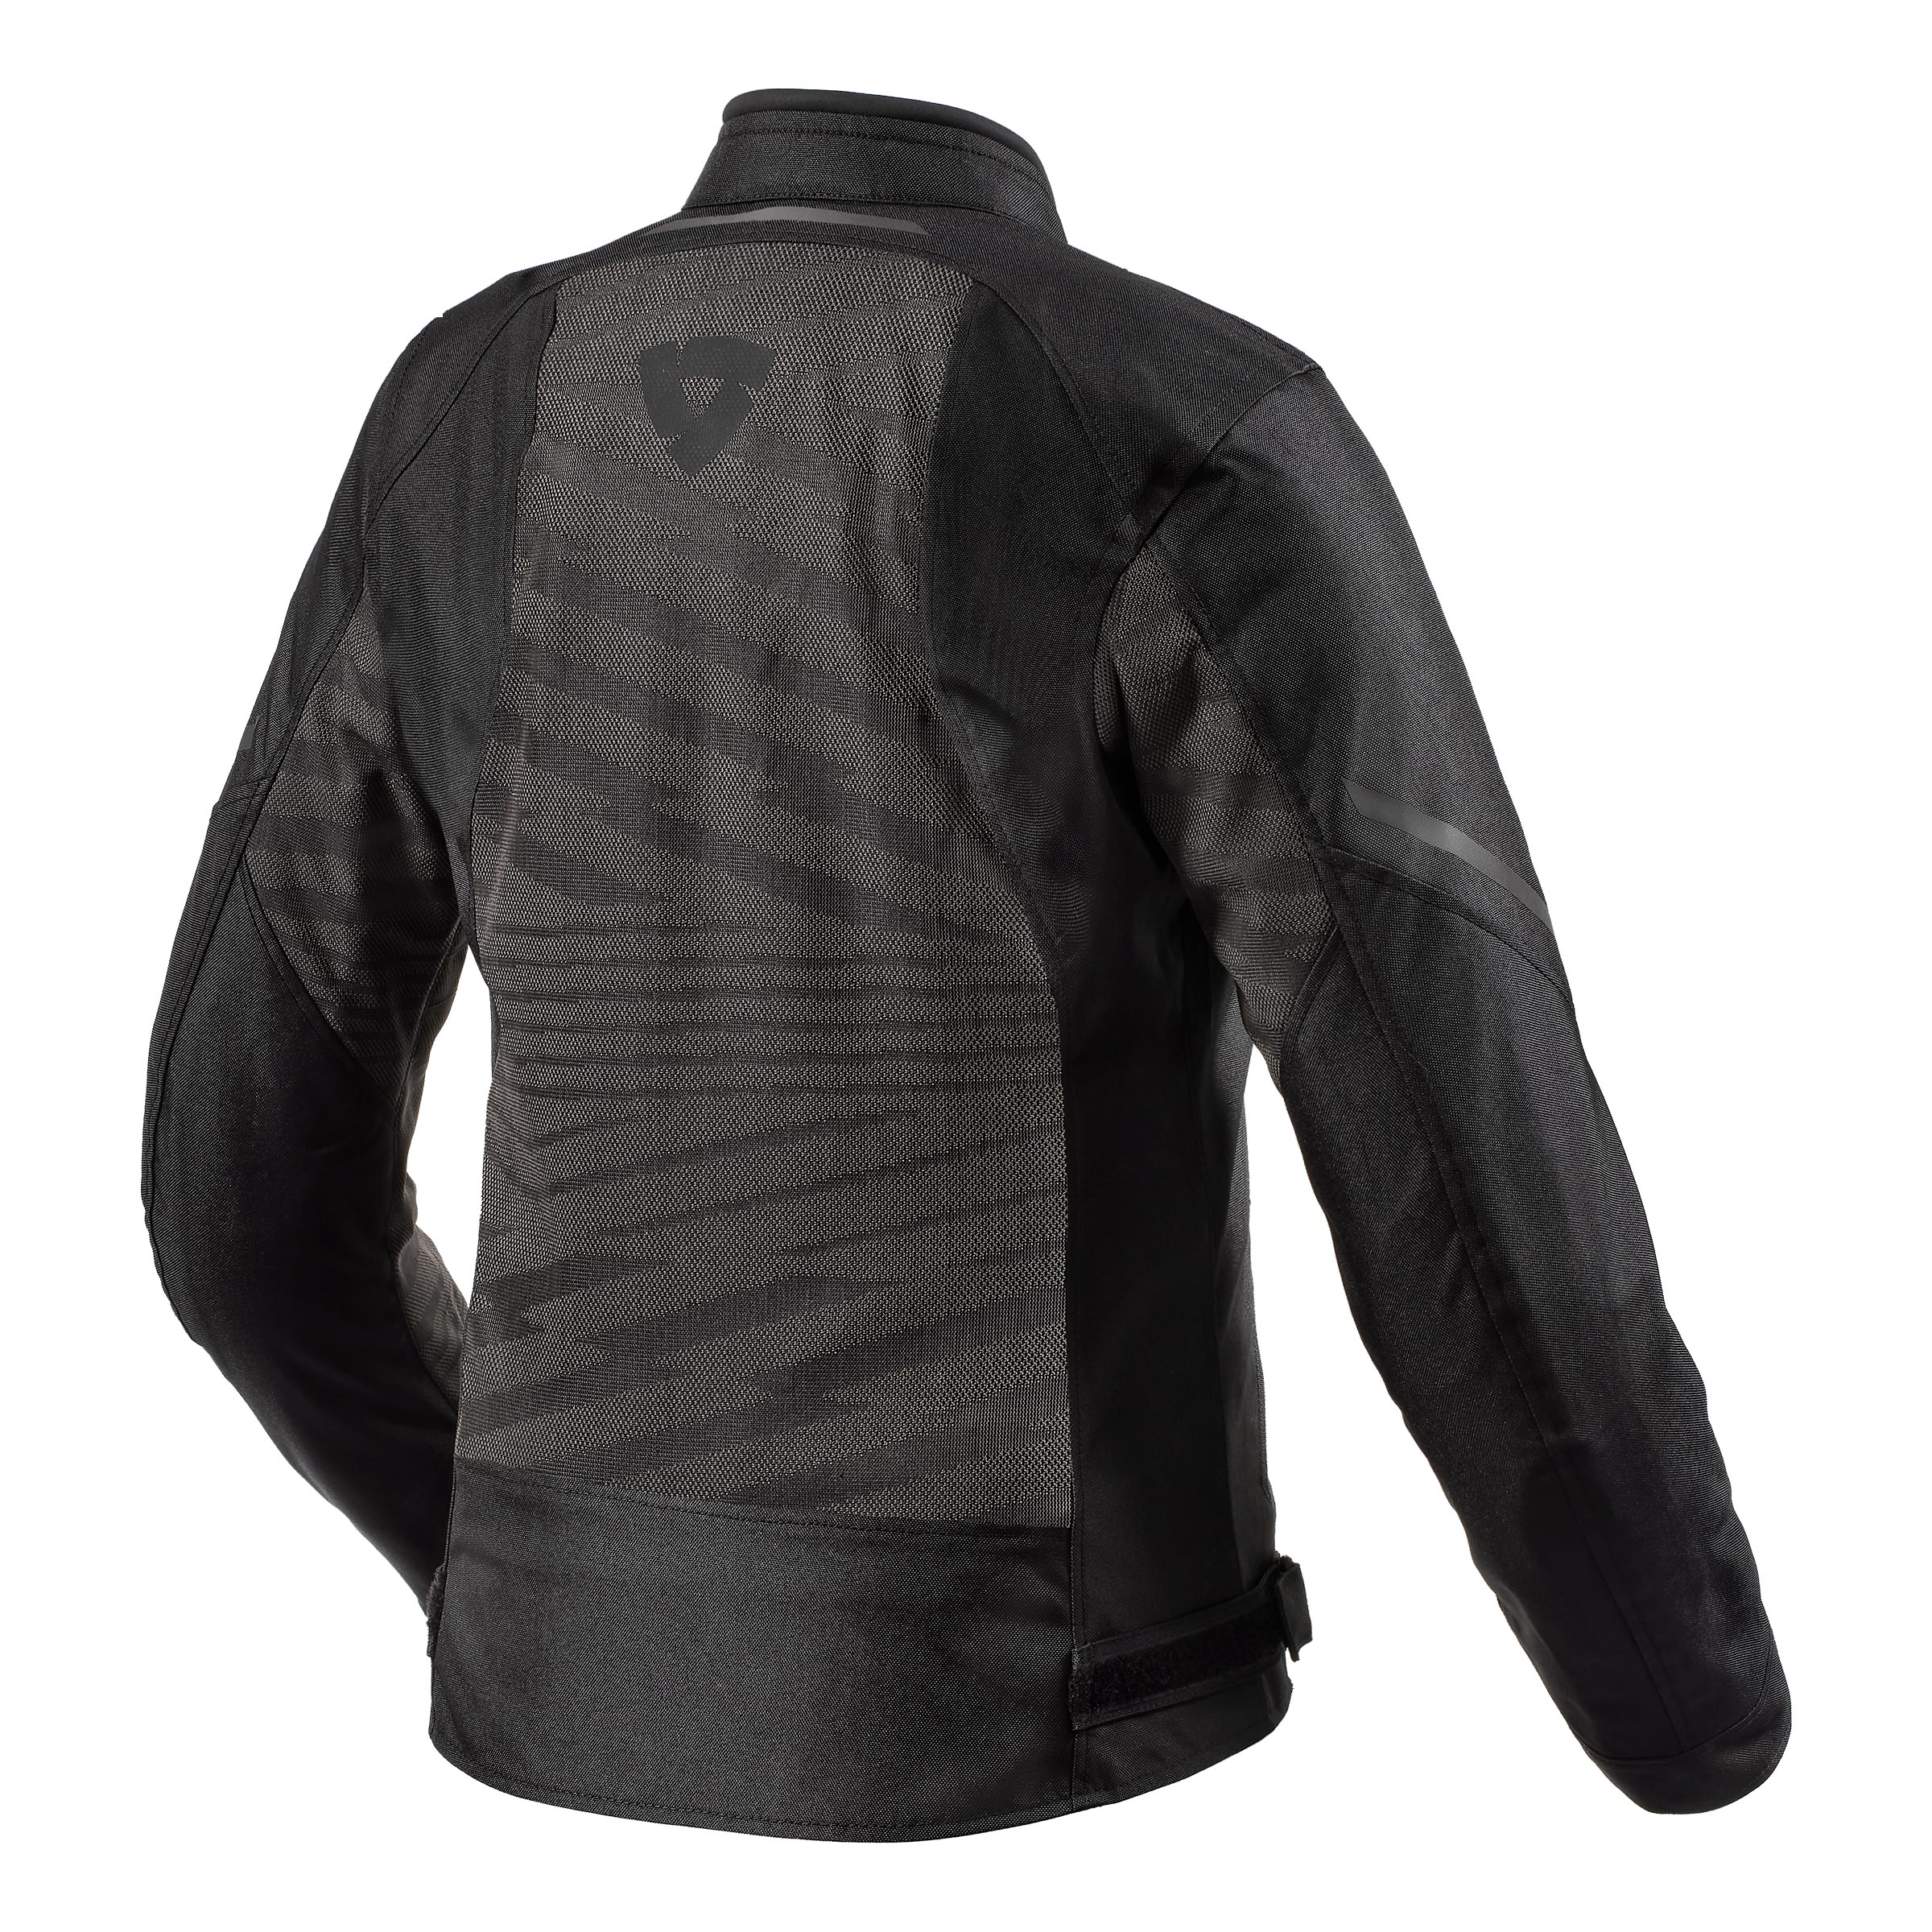 Viewing Images For REVIT Torque 2 H2O Jacket for Women ...